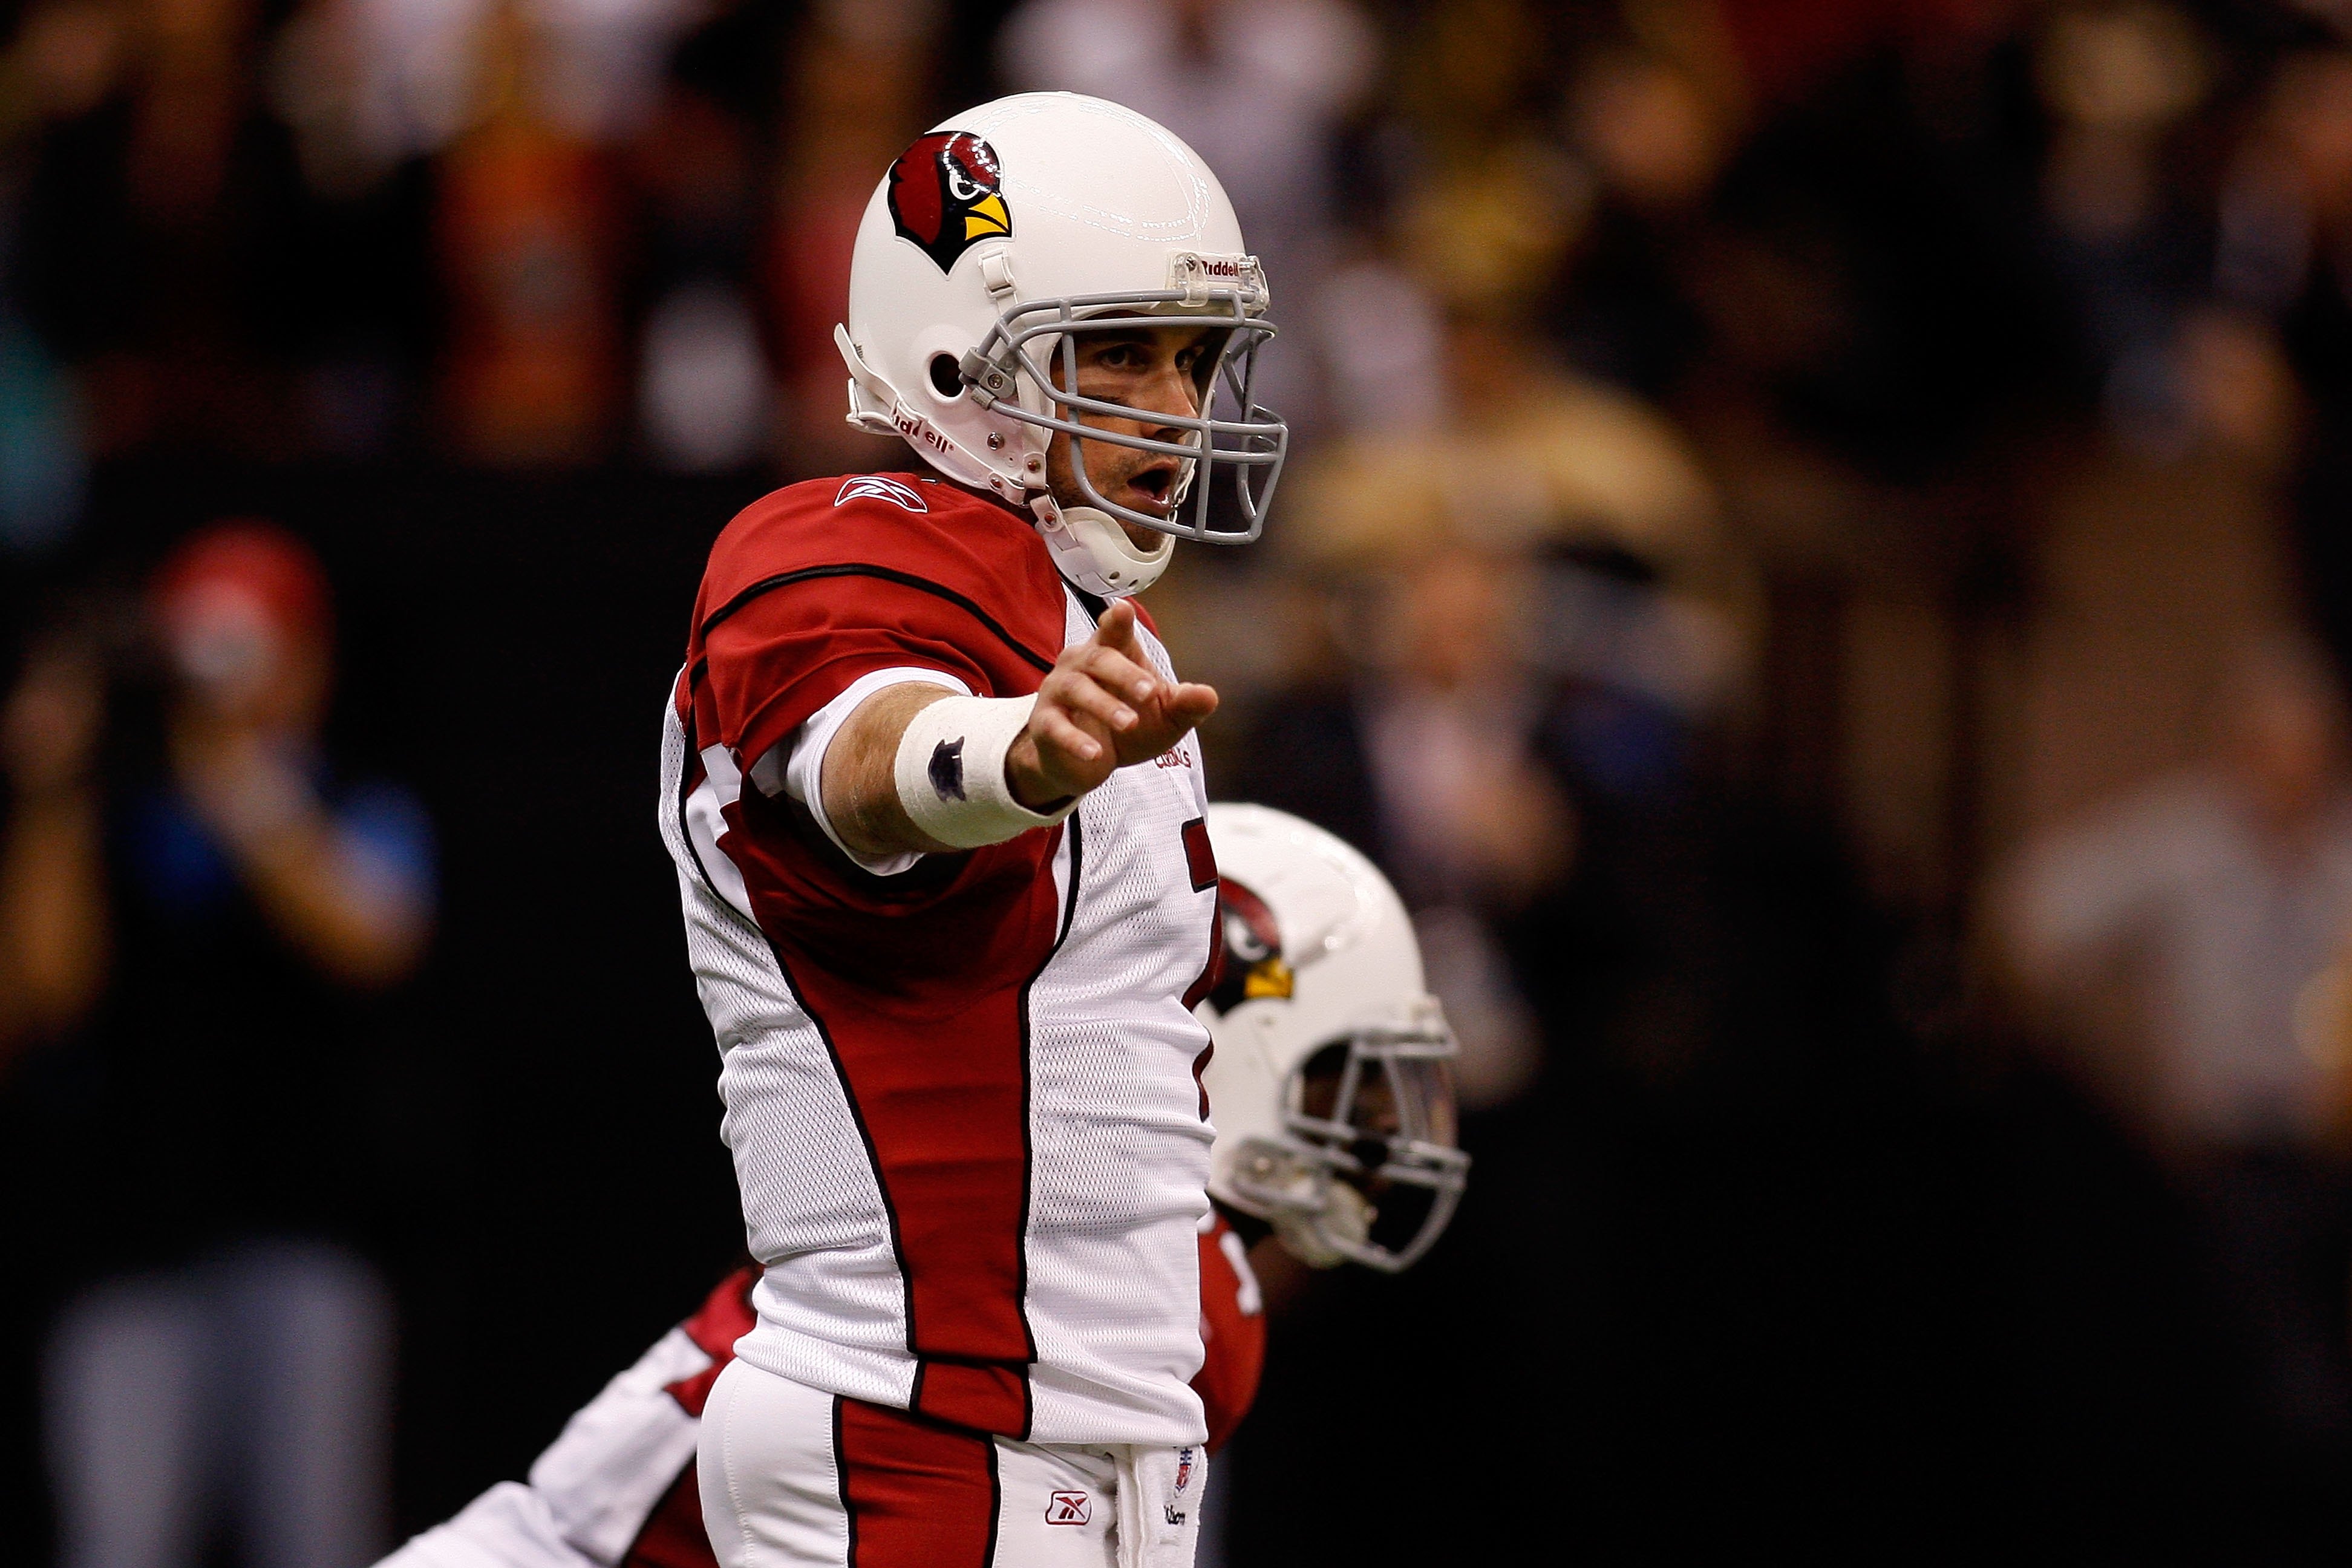 NEW ORLEANS - JANUARY 16:  Quarterback Matt Leinart #7 of the Arizona Cardinals gestures as he awaits the snap against the New Orleans Saints during the NFC Divisional Playoff Game at Louisana Superdome on January 16, 2010 in New Orleans, Louisiana.  (Pho